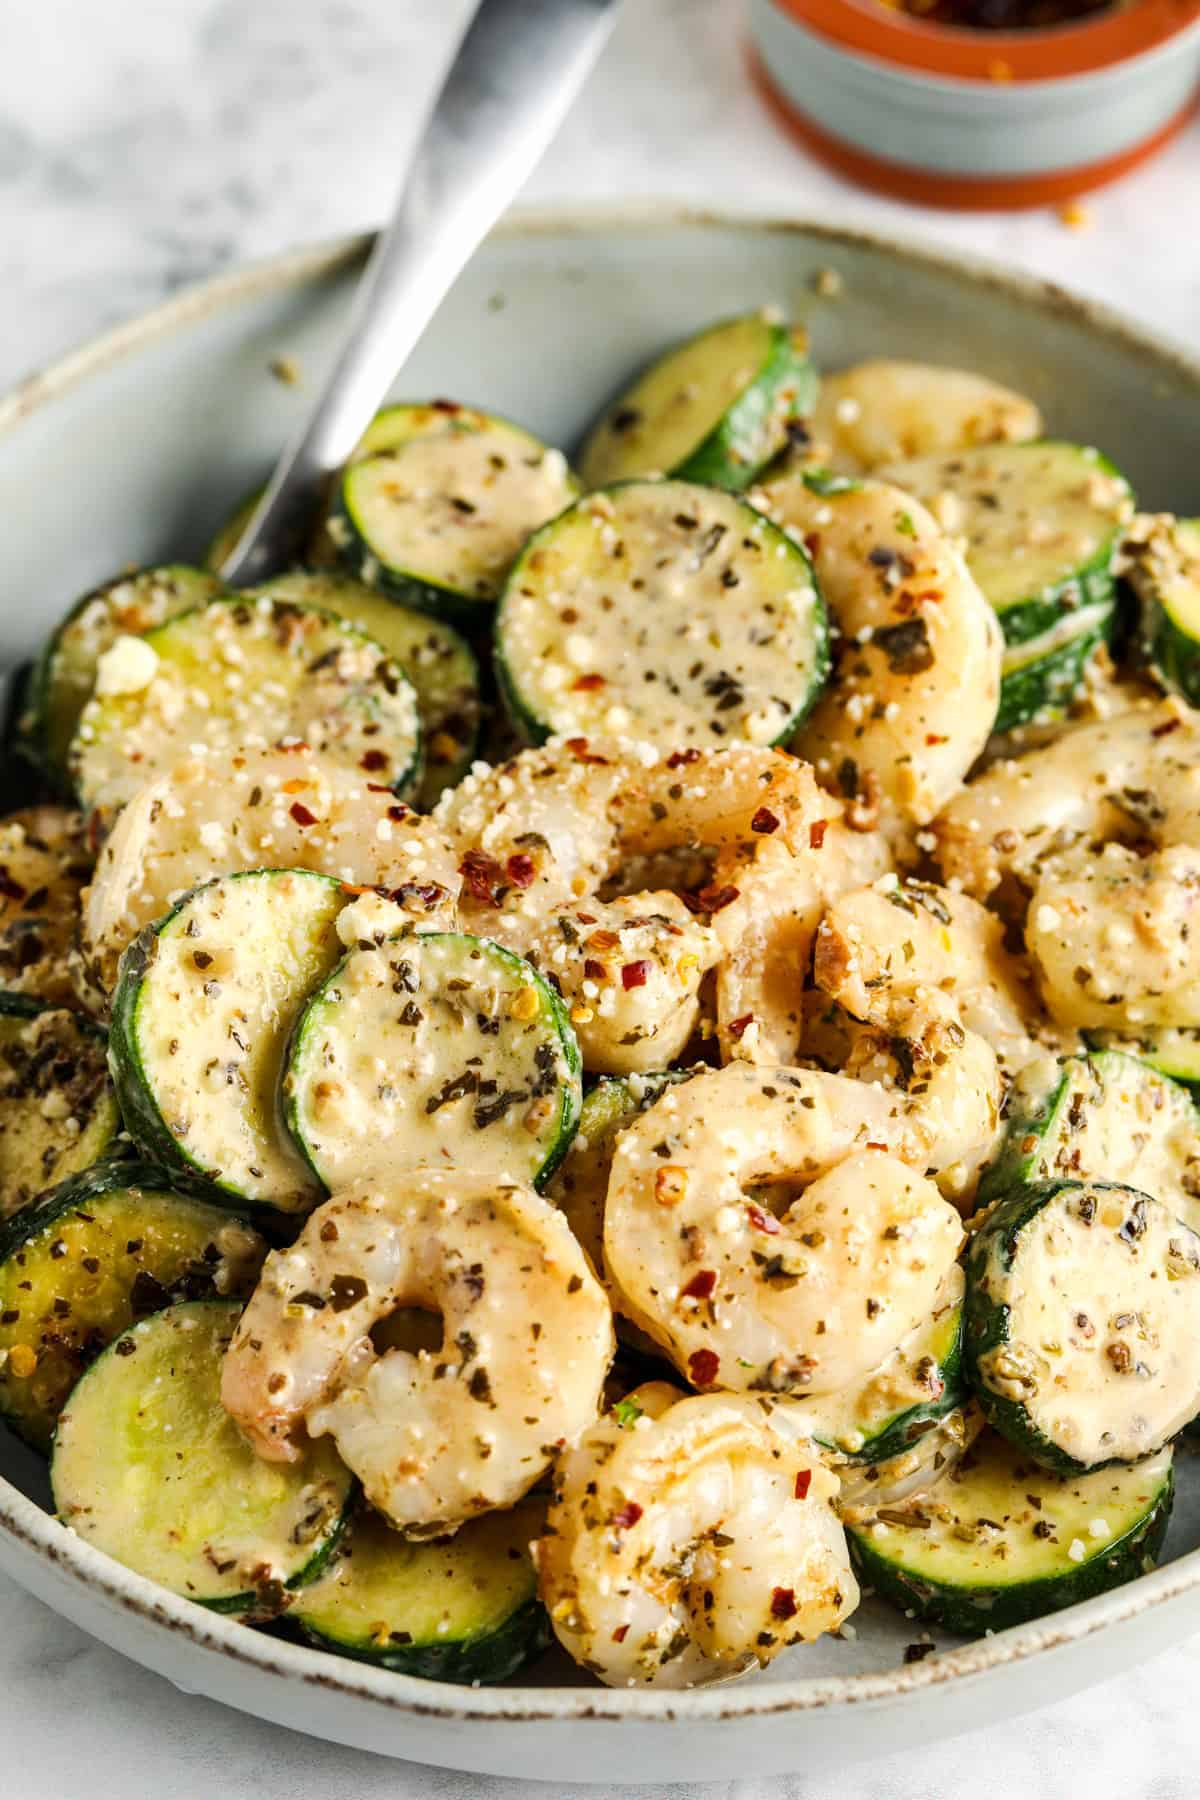 Shrimp &amp; Zucchini (30 minutes Meal!) - Easy Low Carb